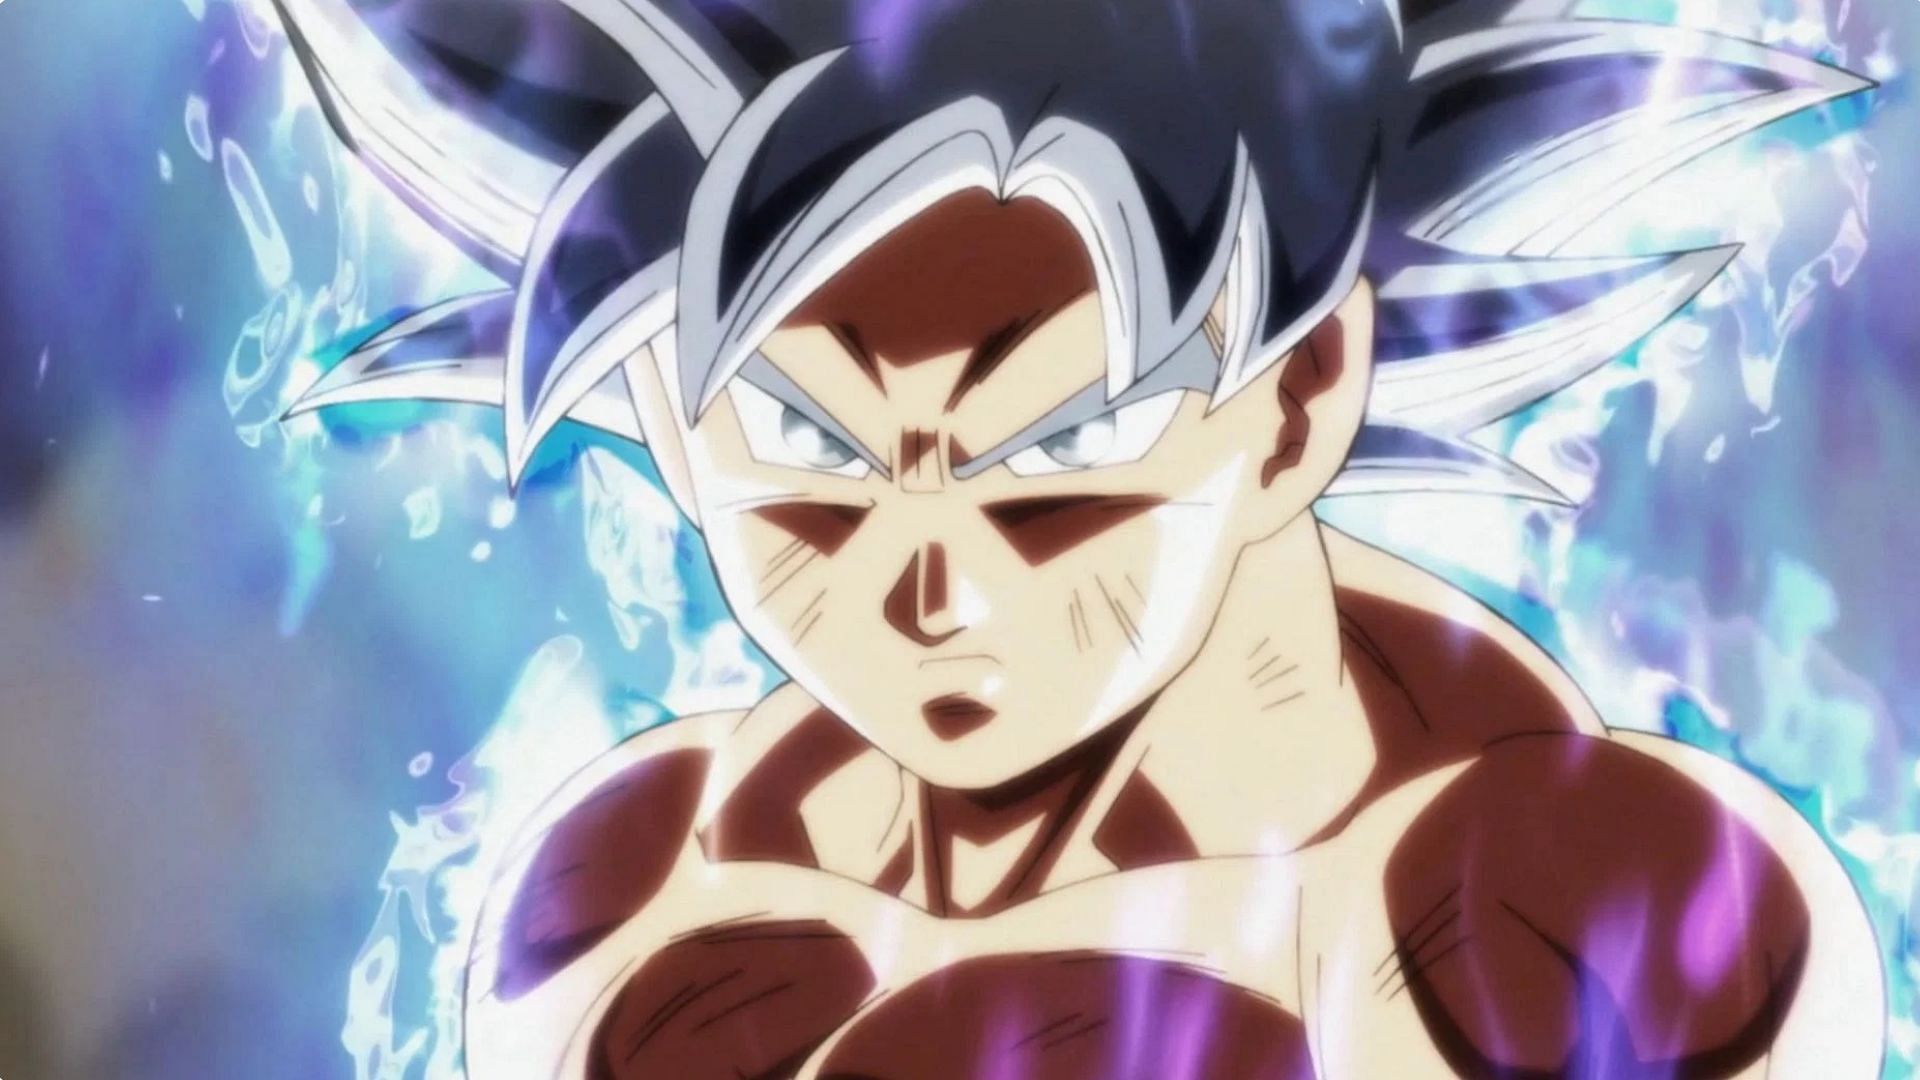 Dragon Ball Special Team teases new series (Image via Toei Animation)